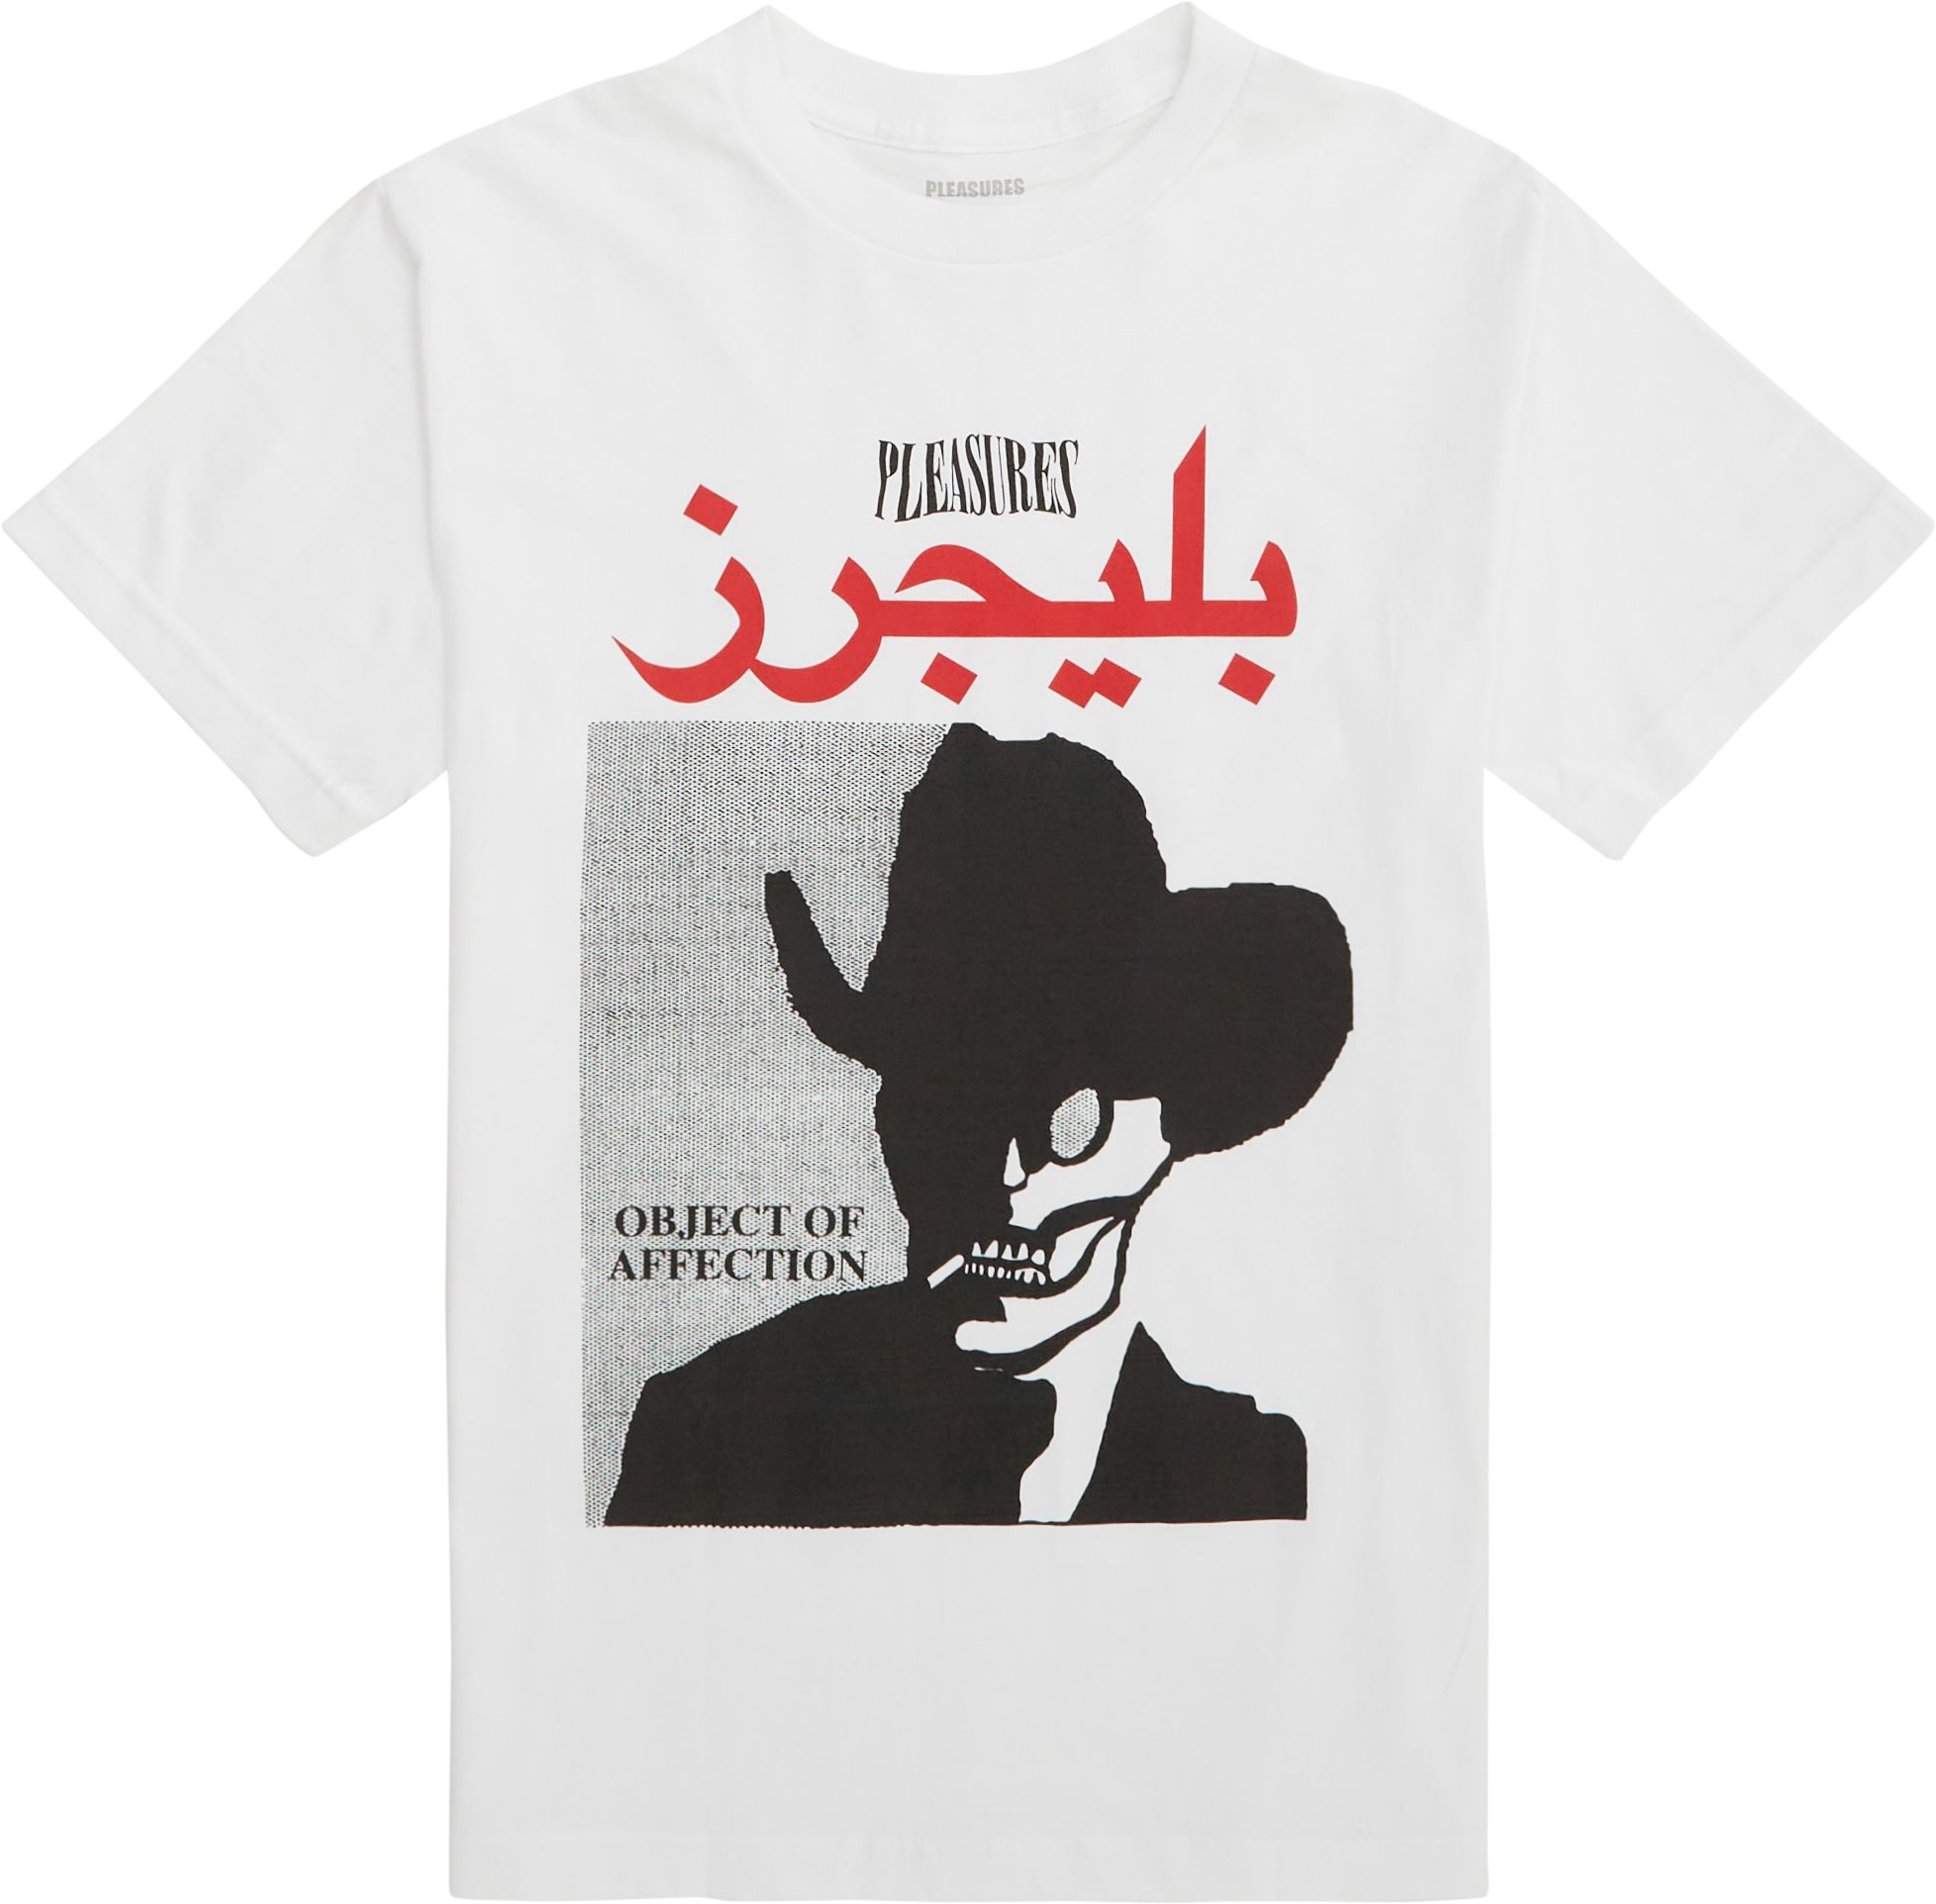 Pleasures T-shirts AFFECTION TEE White